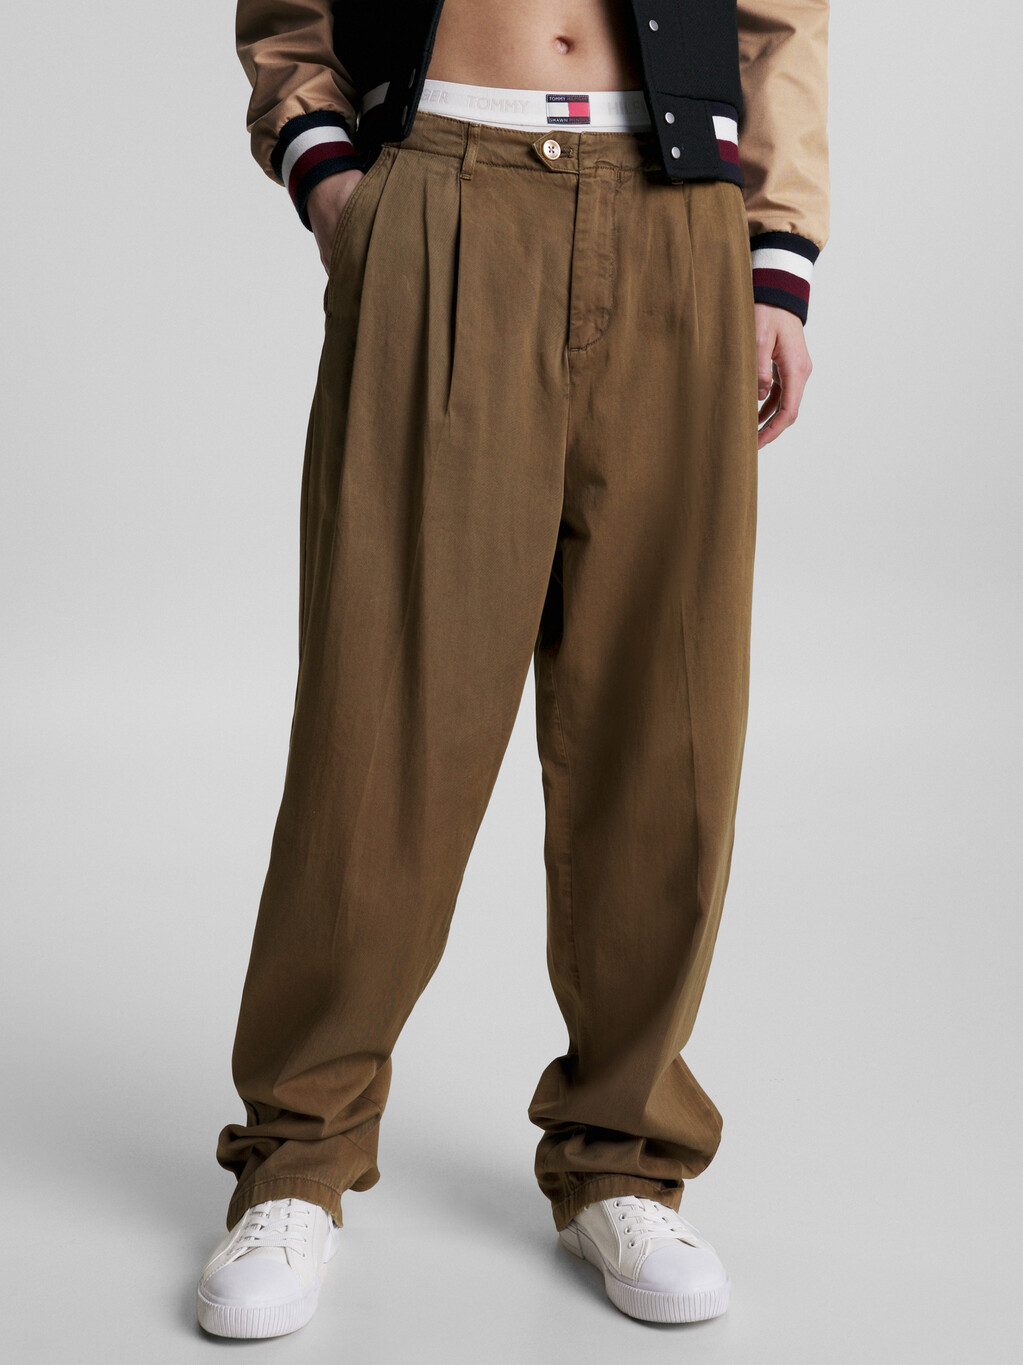 Tommy Hilfiger X Shawn Mendes Pleated Trousers, brown